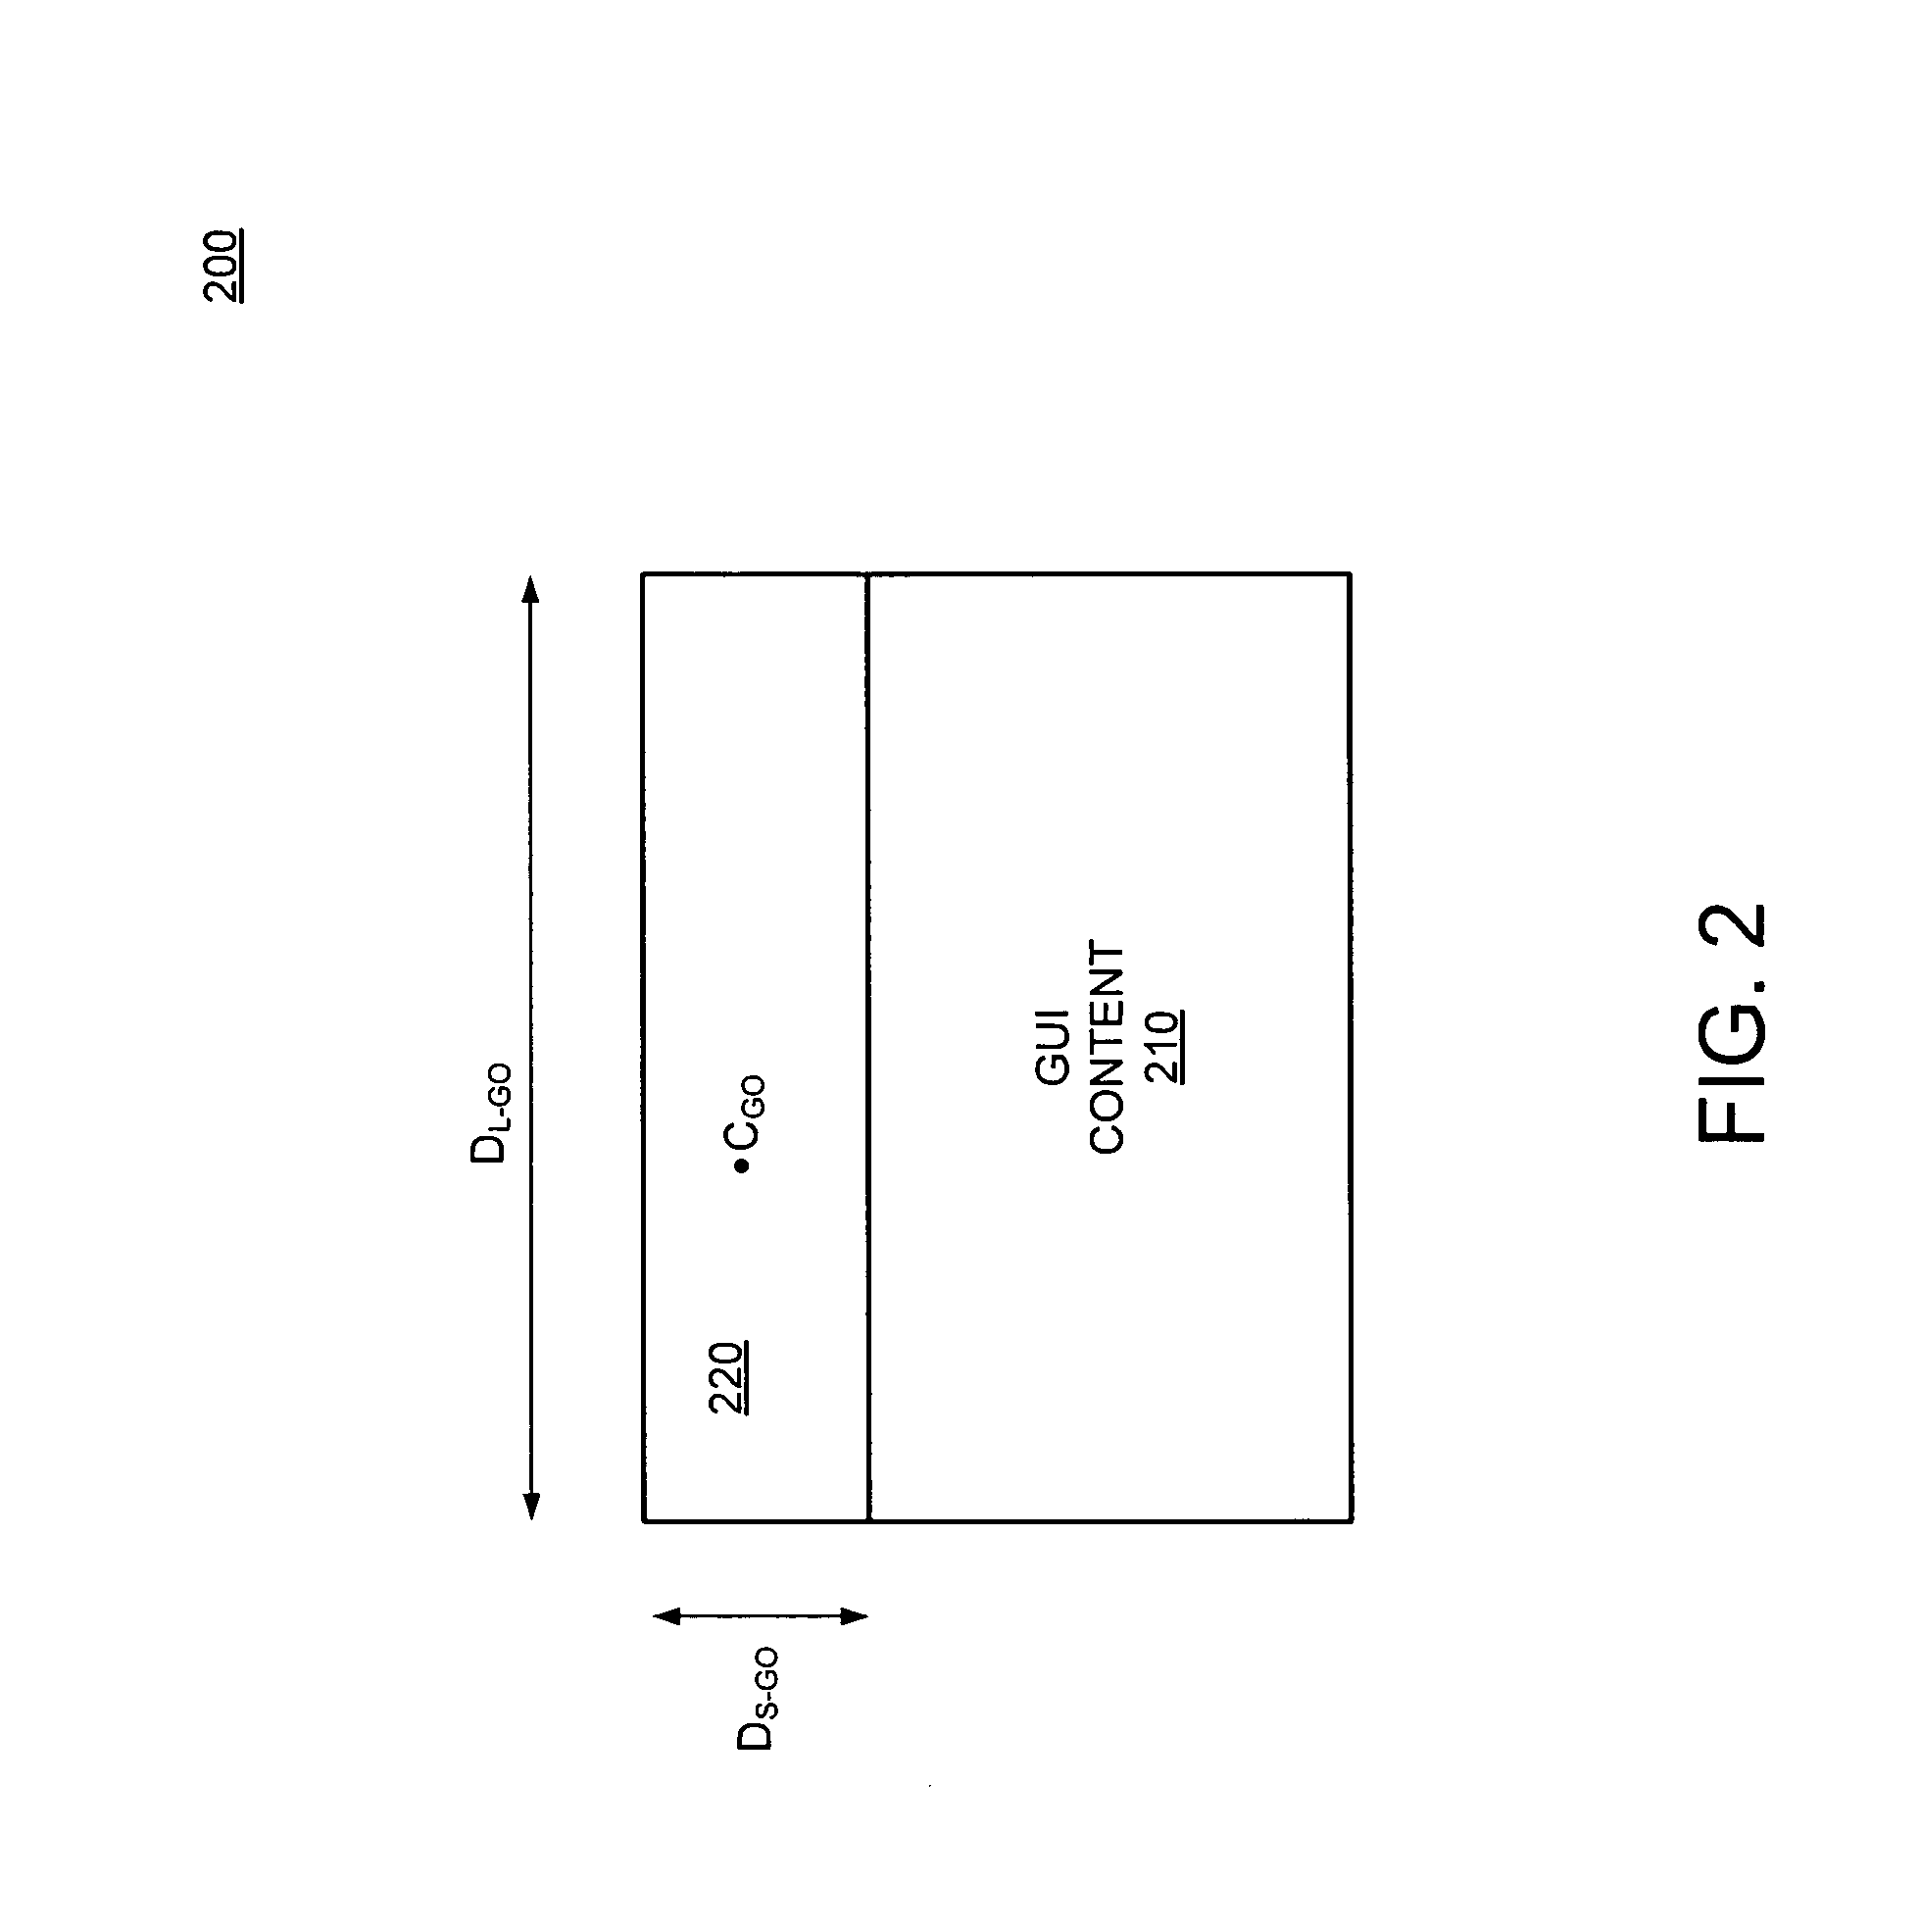 Method and apparatus for displaying a graphical object within a grid of a graphical user interface